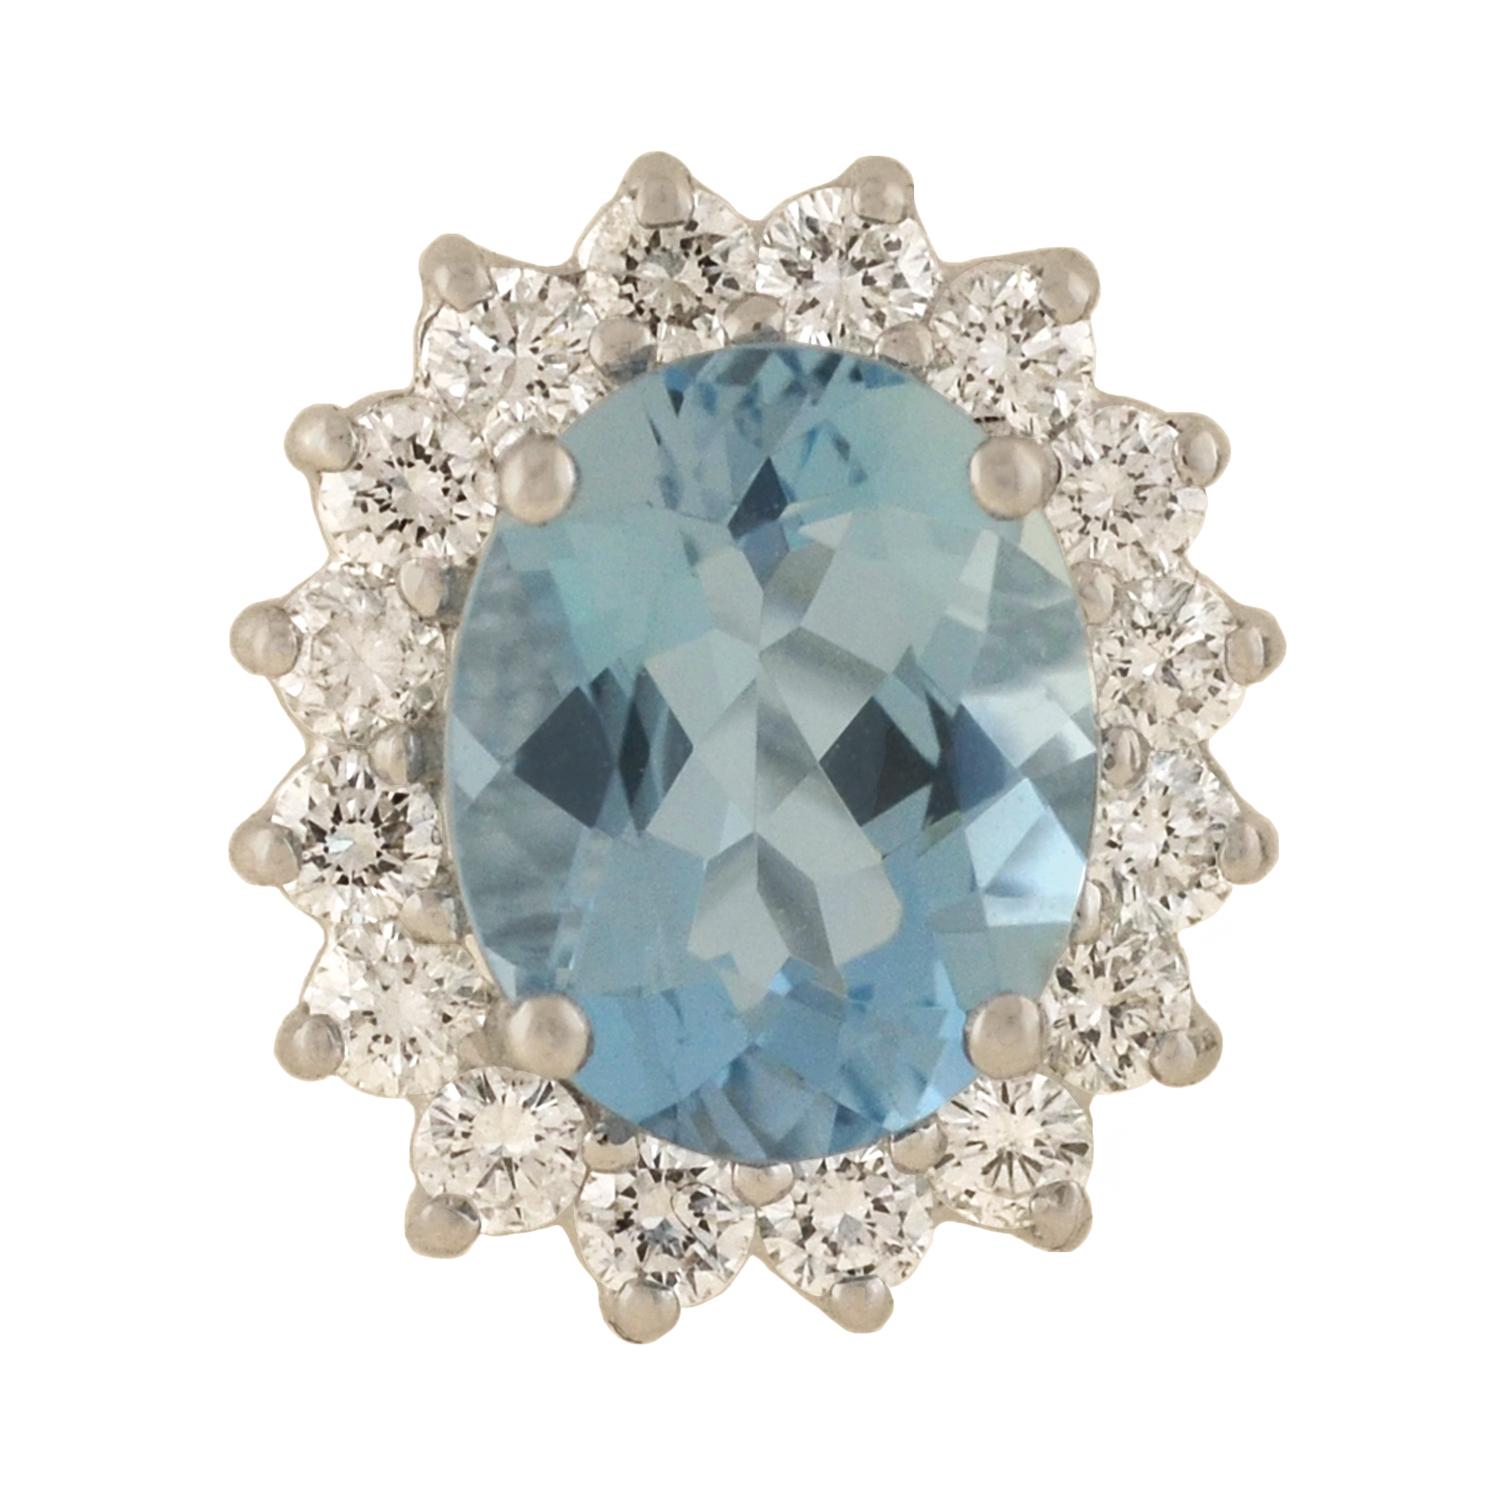 A gorgeous pair of Estate aquamarine and diamond earrings! Crafted in 18kt white gold, each stud displays a fabulous gemstone cluster design. The faceted oval-shaped aquamarines each weigh approximately 2.00ct, for a combined weight of 4.00ctw, and